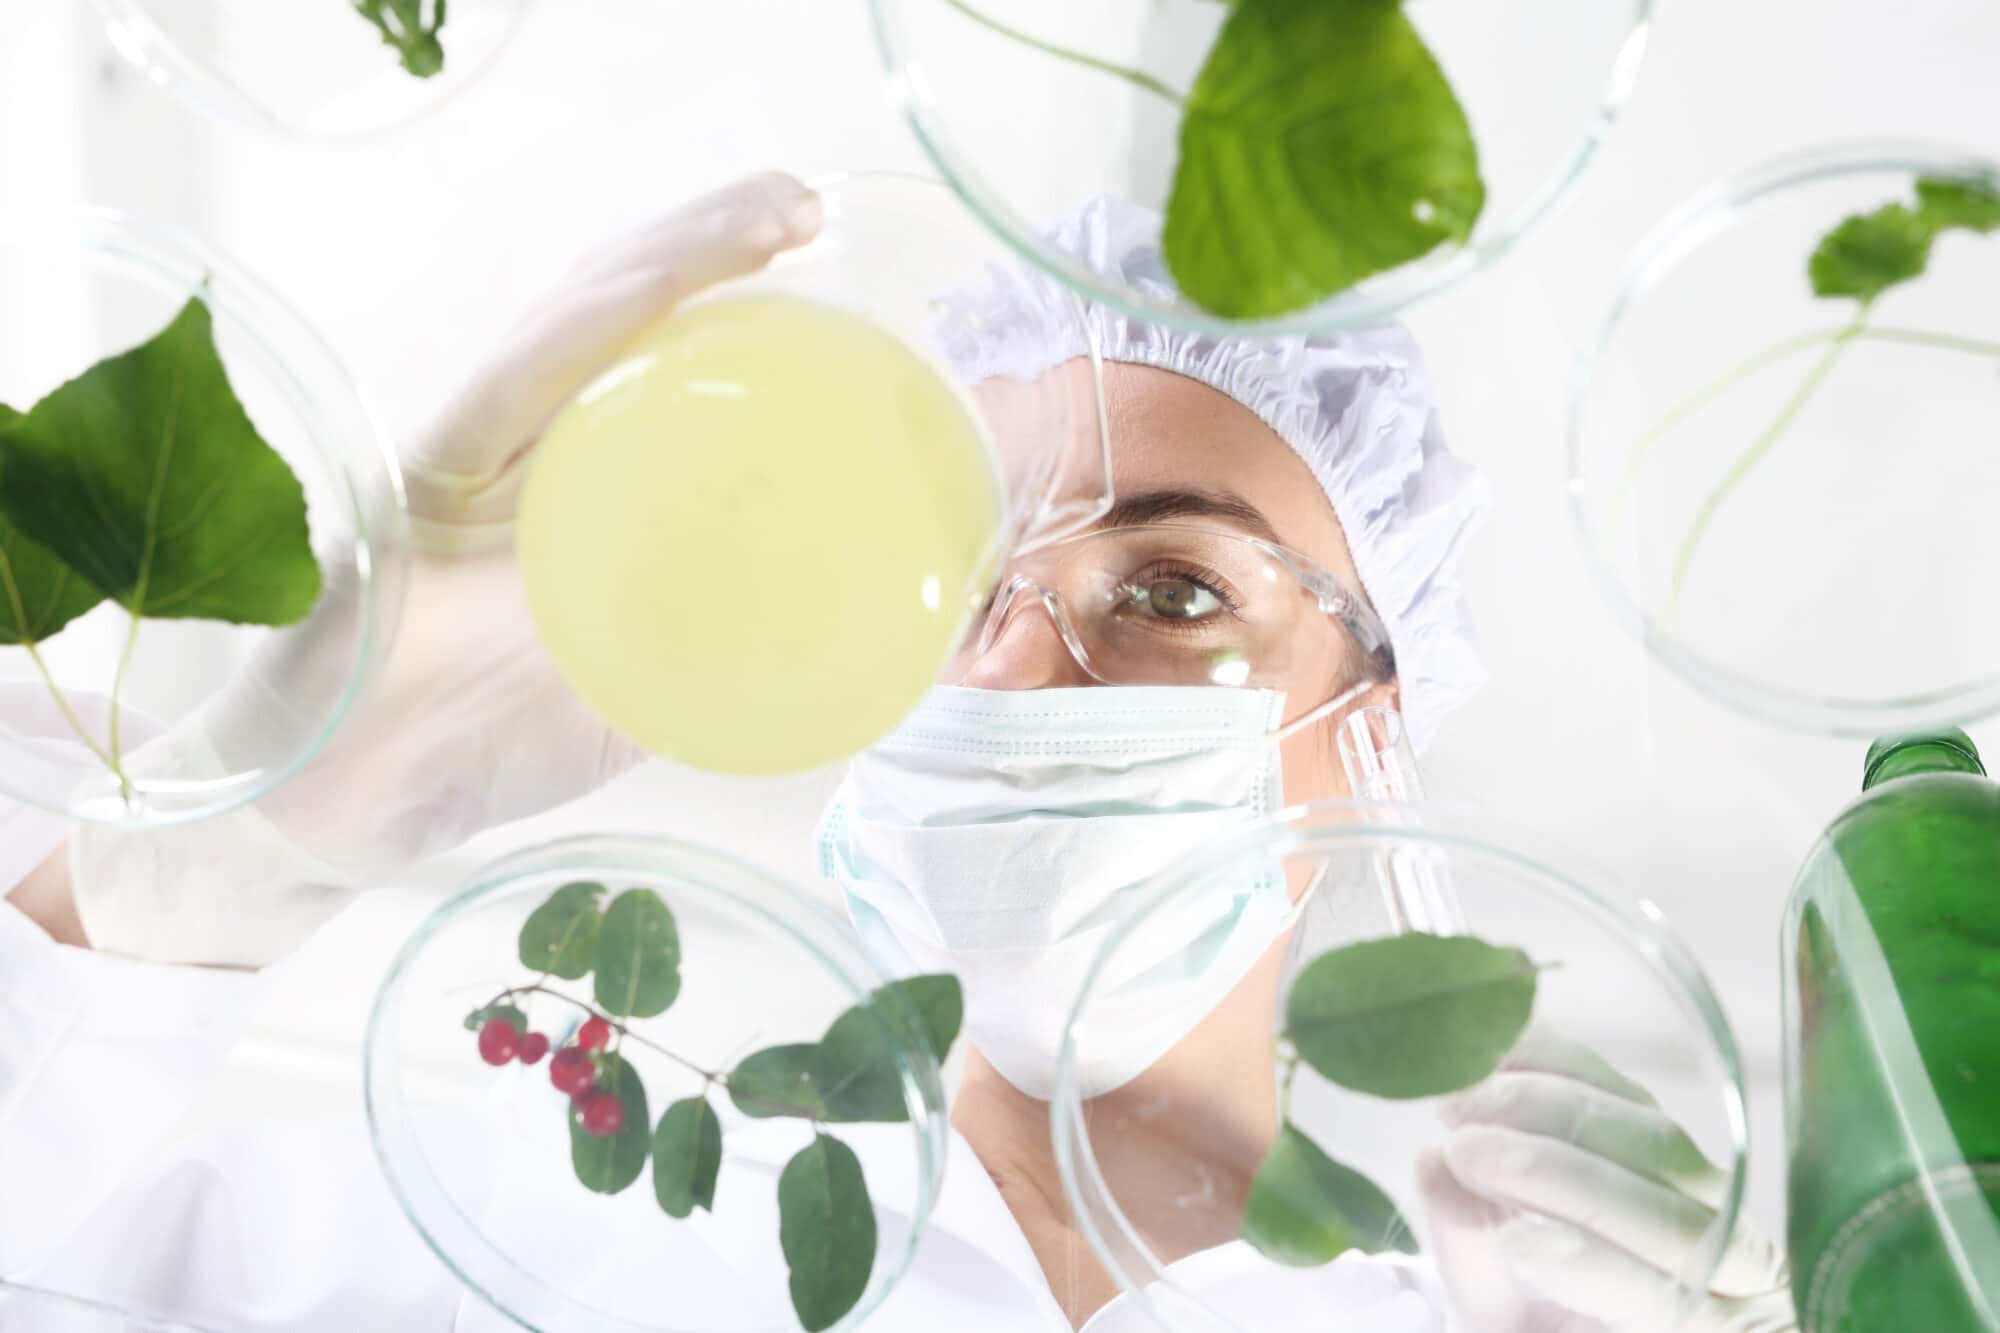 Biotechnologist examine the plant samples in the laboratory